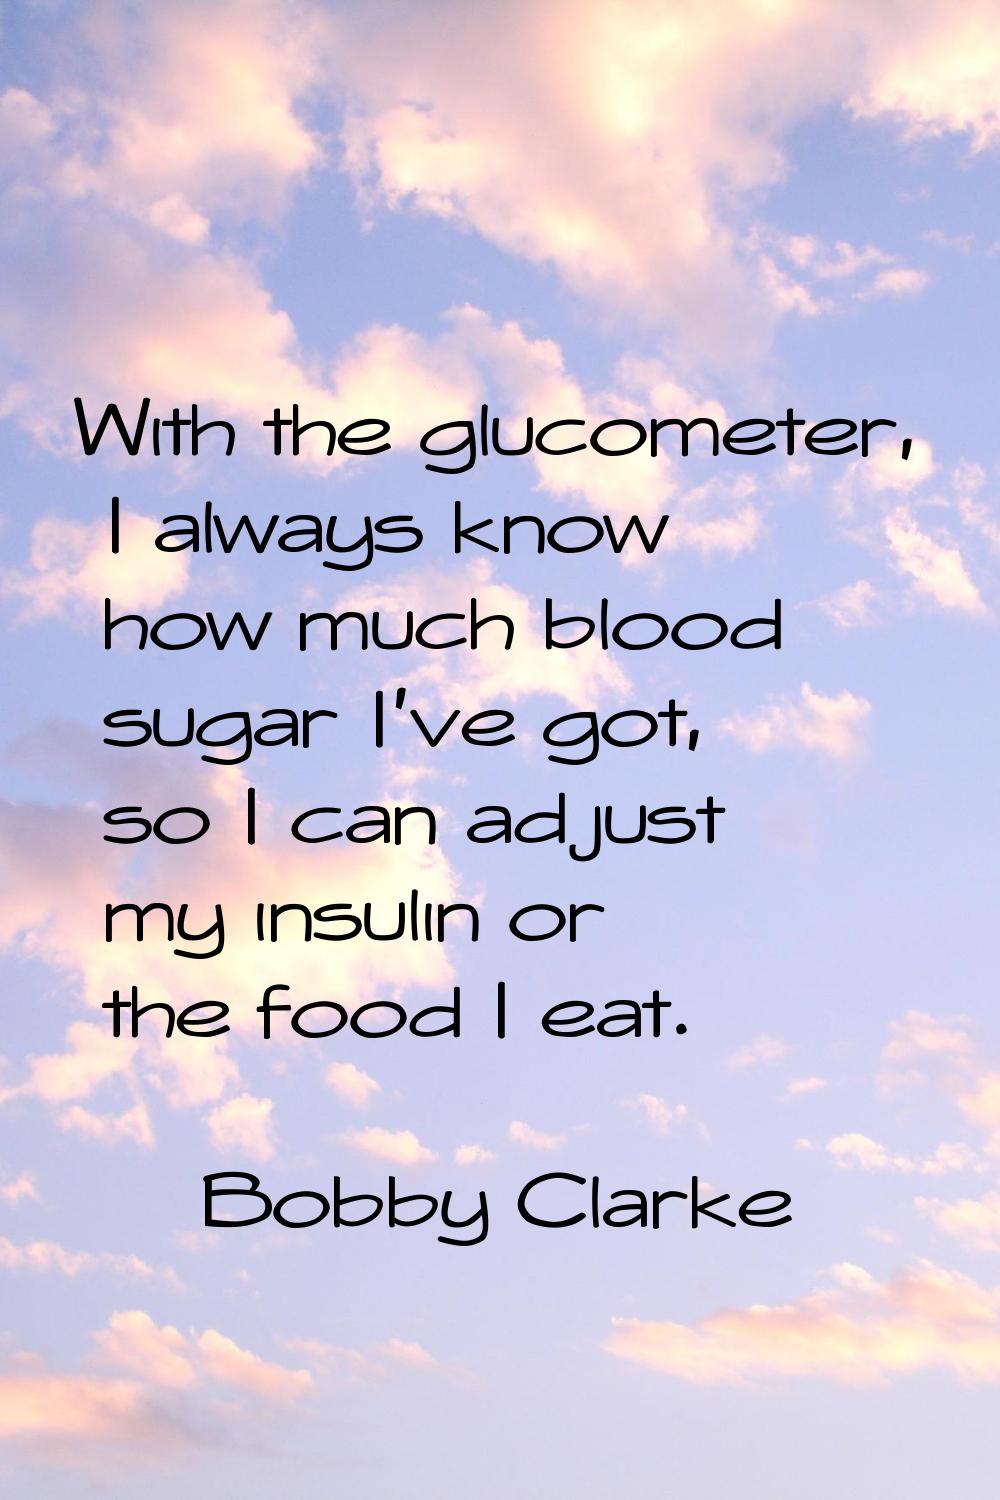 With the glucometer, I always know how much blood sugar I've got, so I can adjust my insulin or the